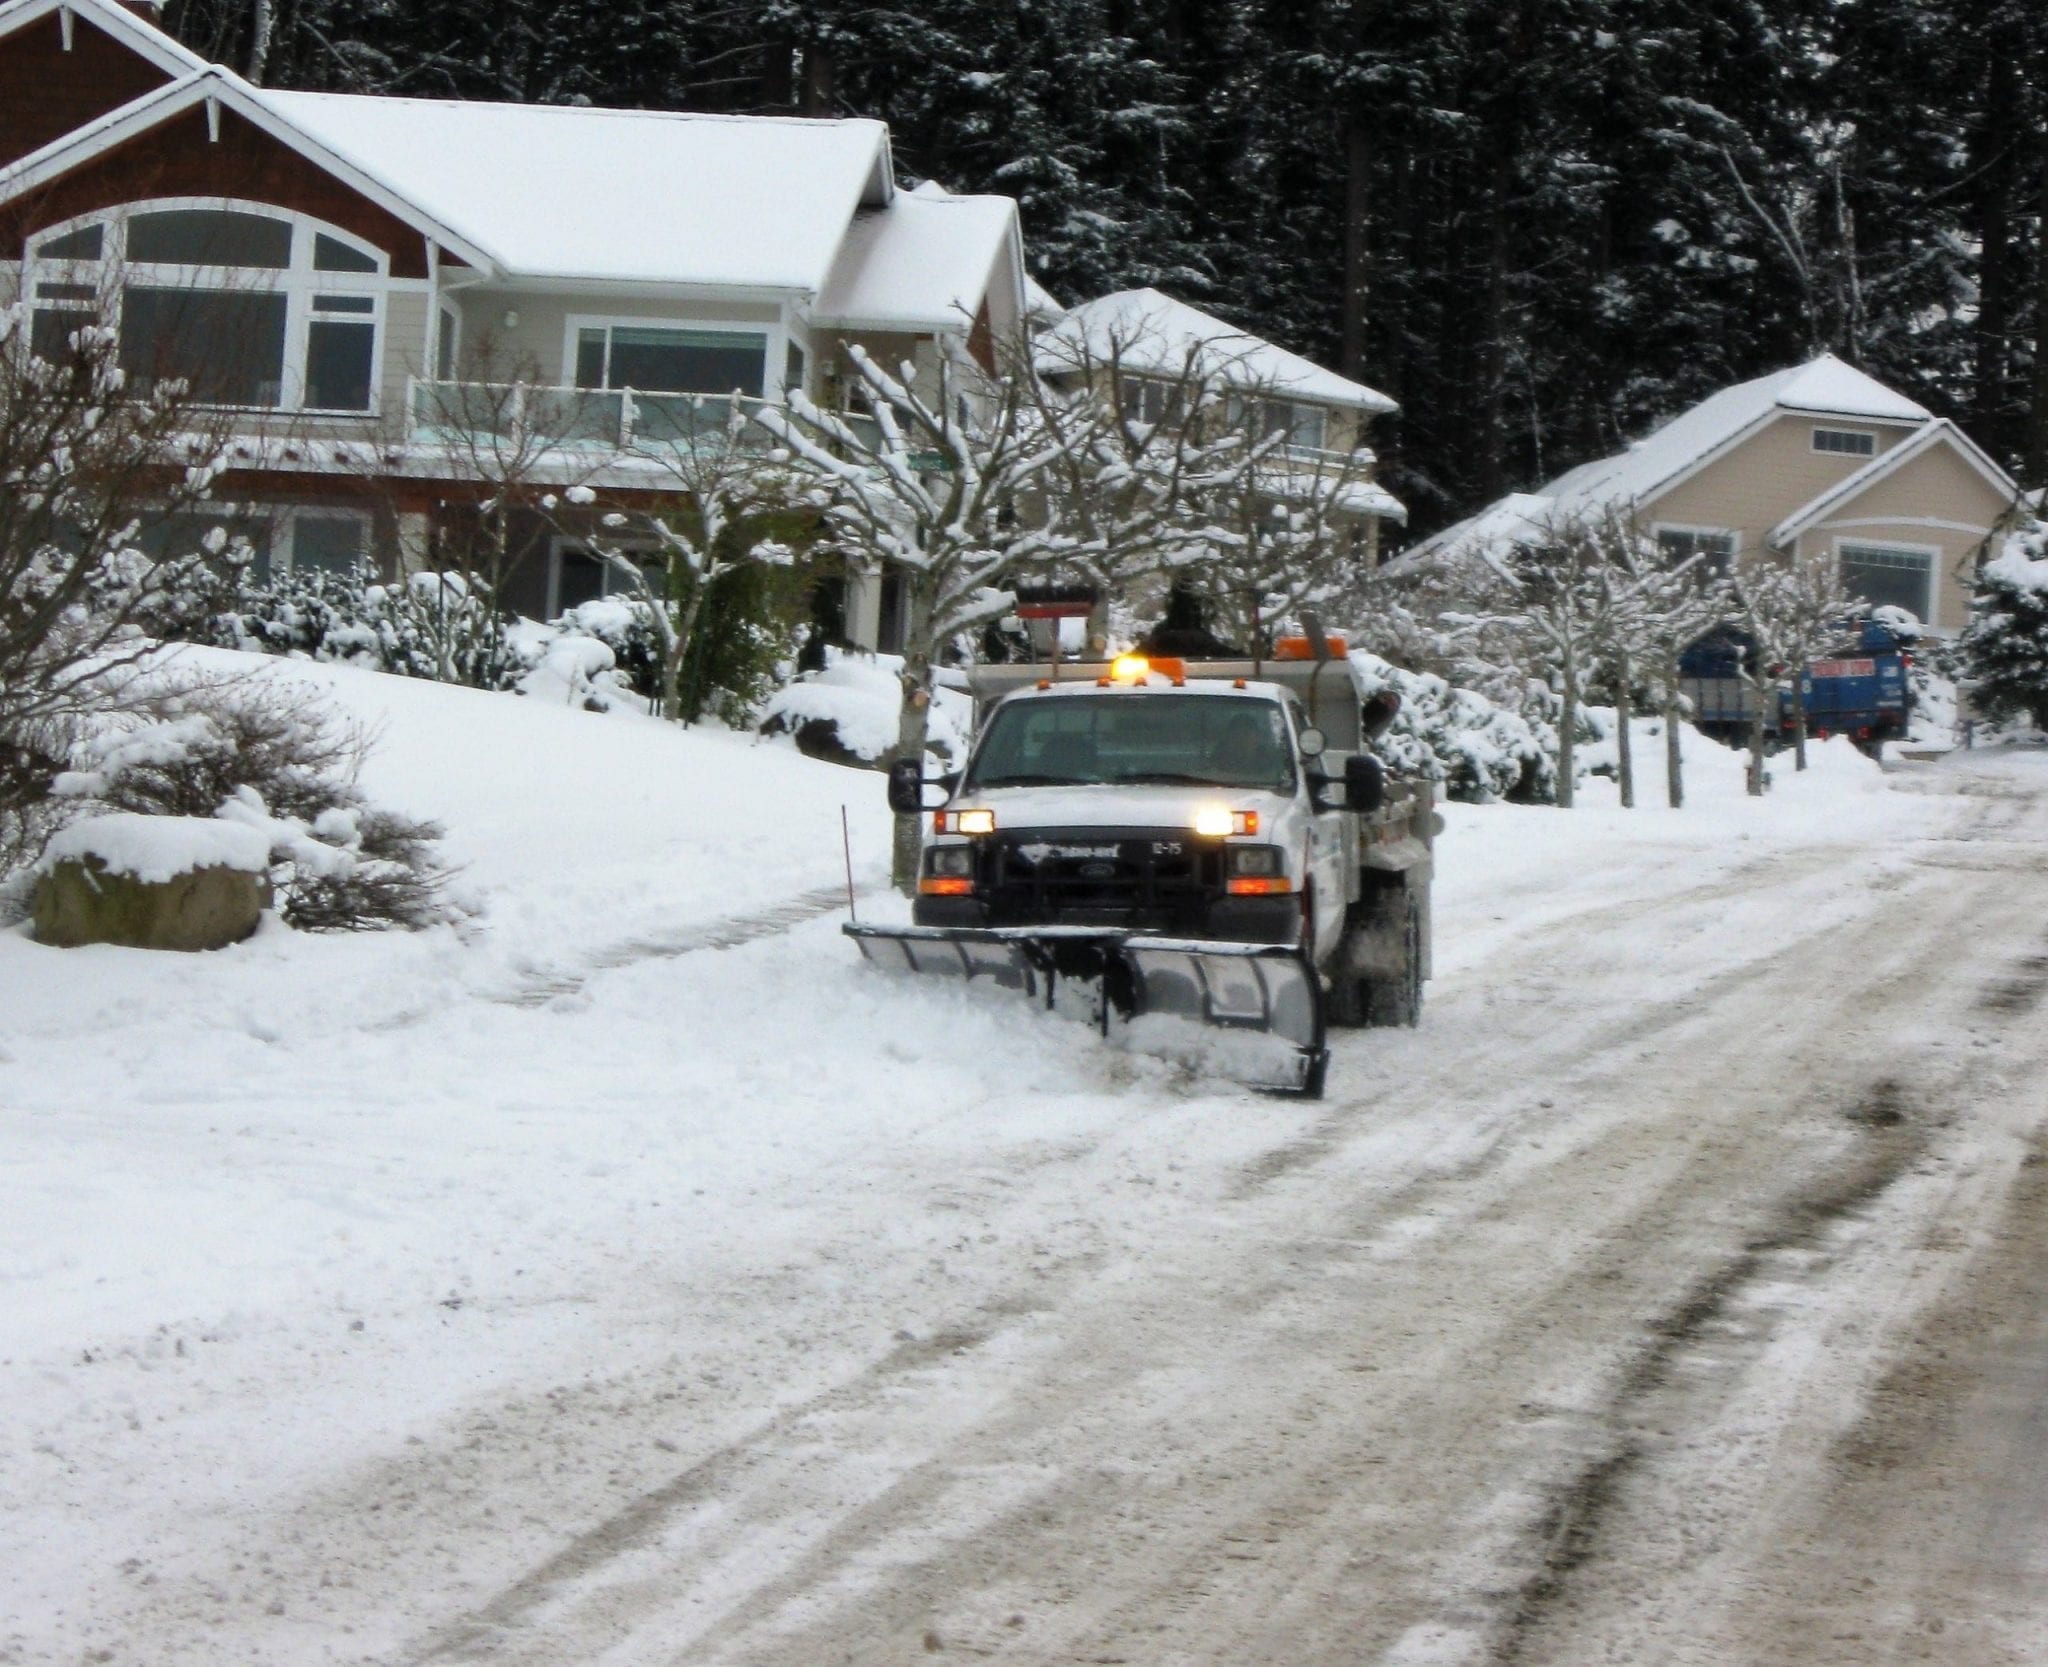 large utility truck using snow plow to clear residential street